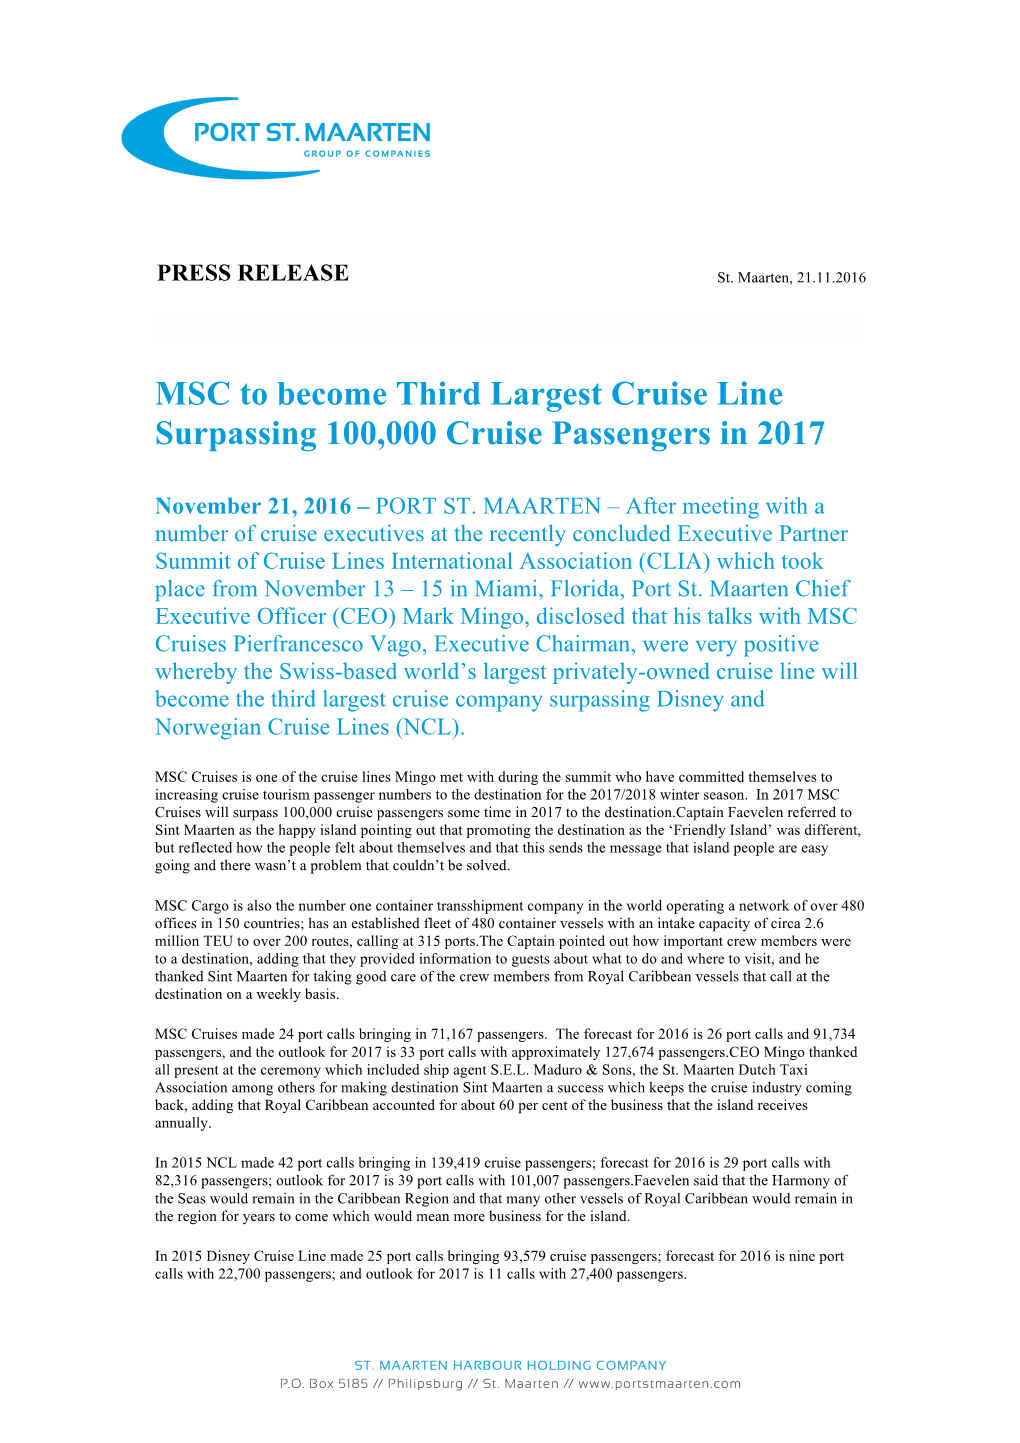 MSC to Become Third Largest Cruise Line Surpassing 100,000 Cruise Passengers in 2017